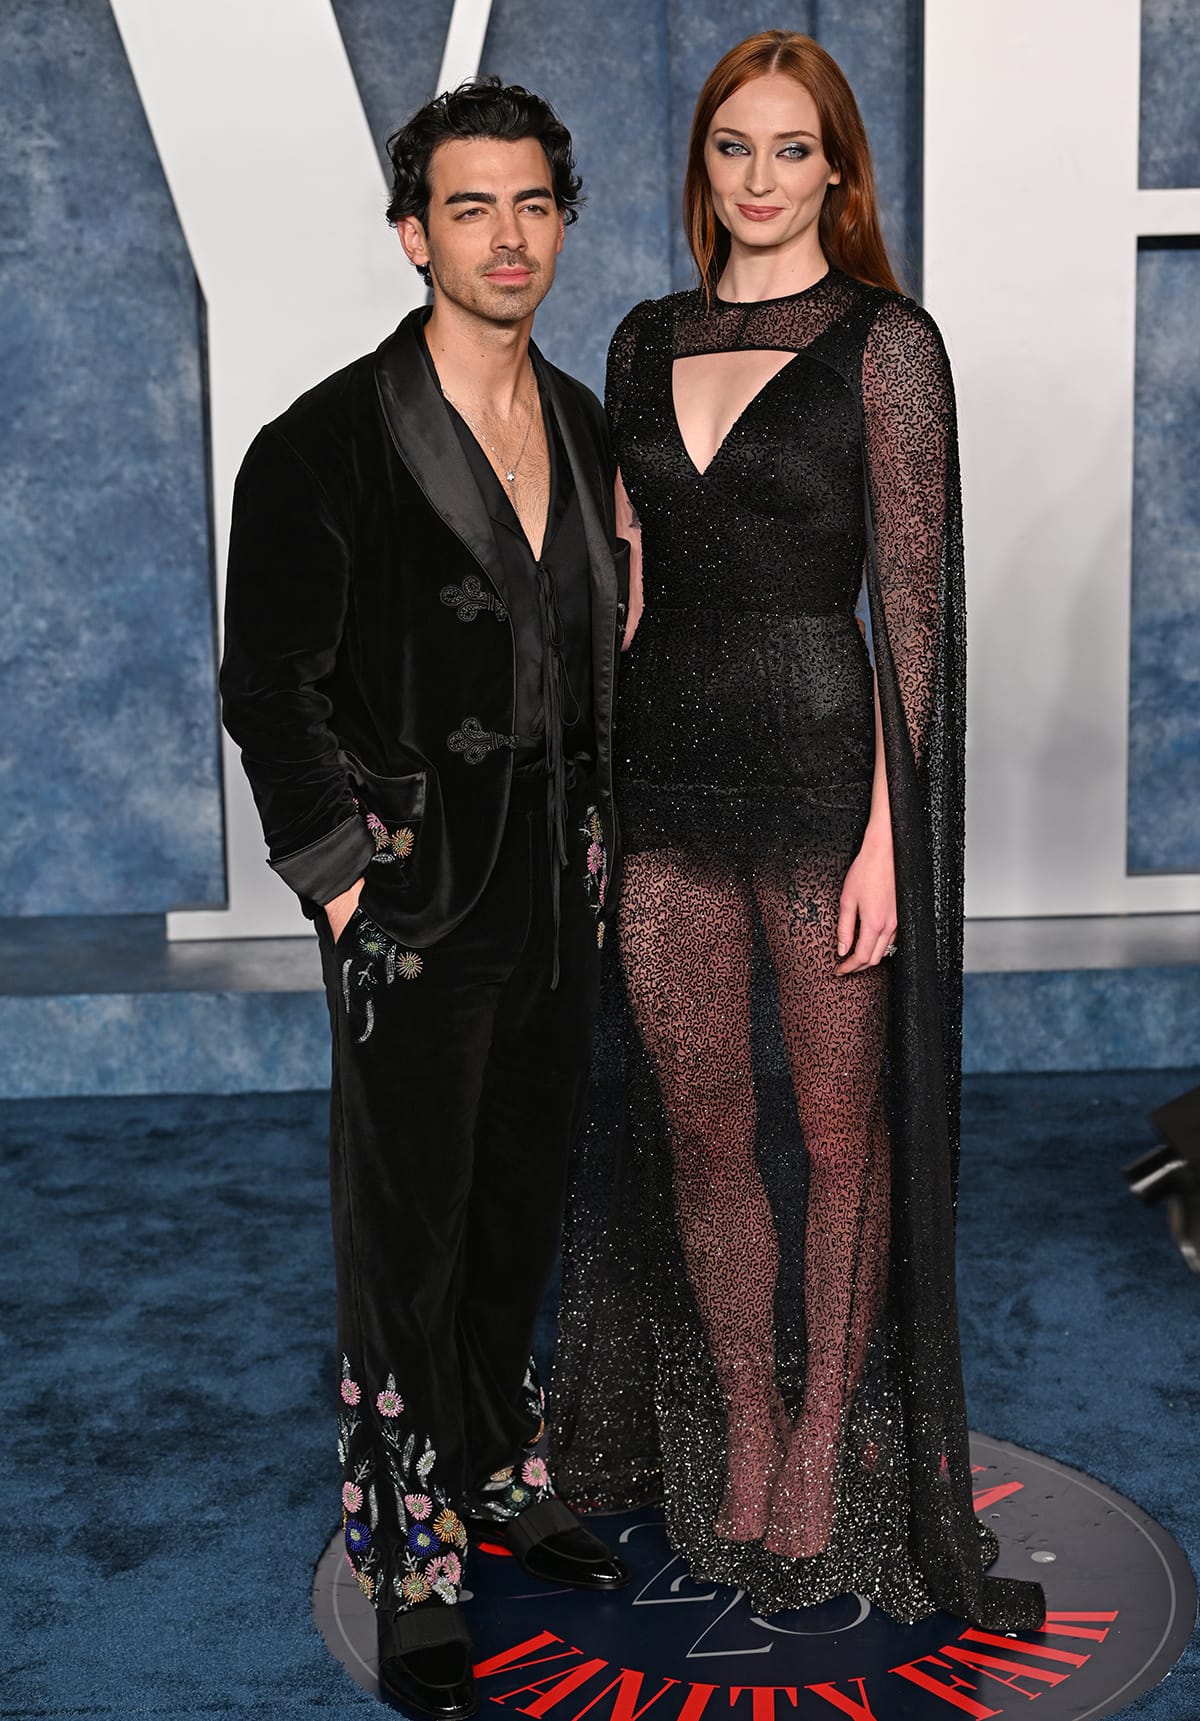 Joe Jonas addresses estranged wife Sophie Turner's romance rumors with Peregrine Pearson, saying it's too soon for her to be dating and displaying affection in public